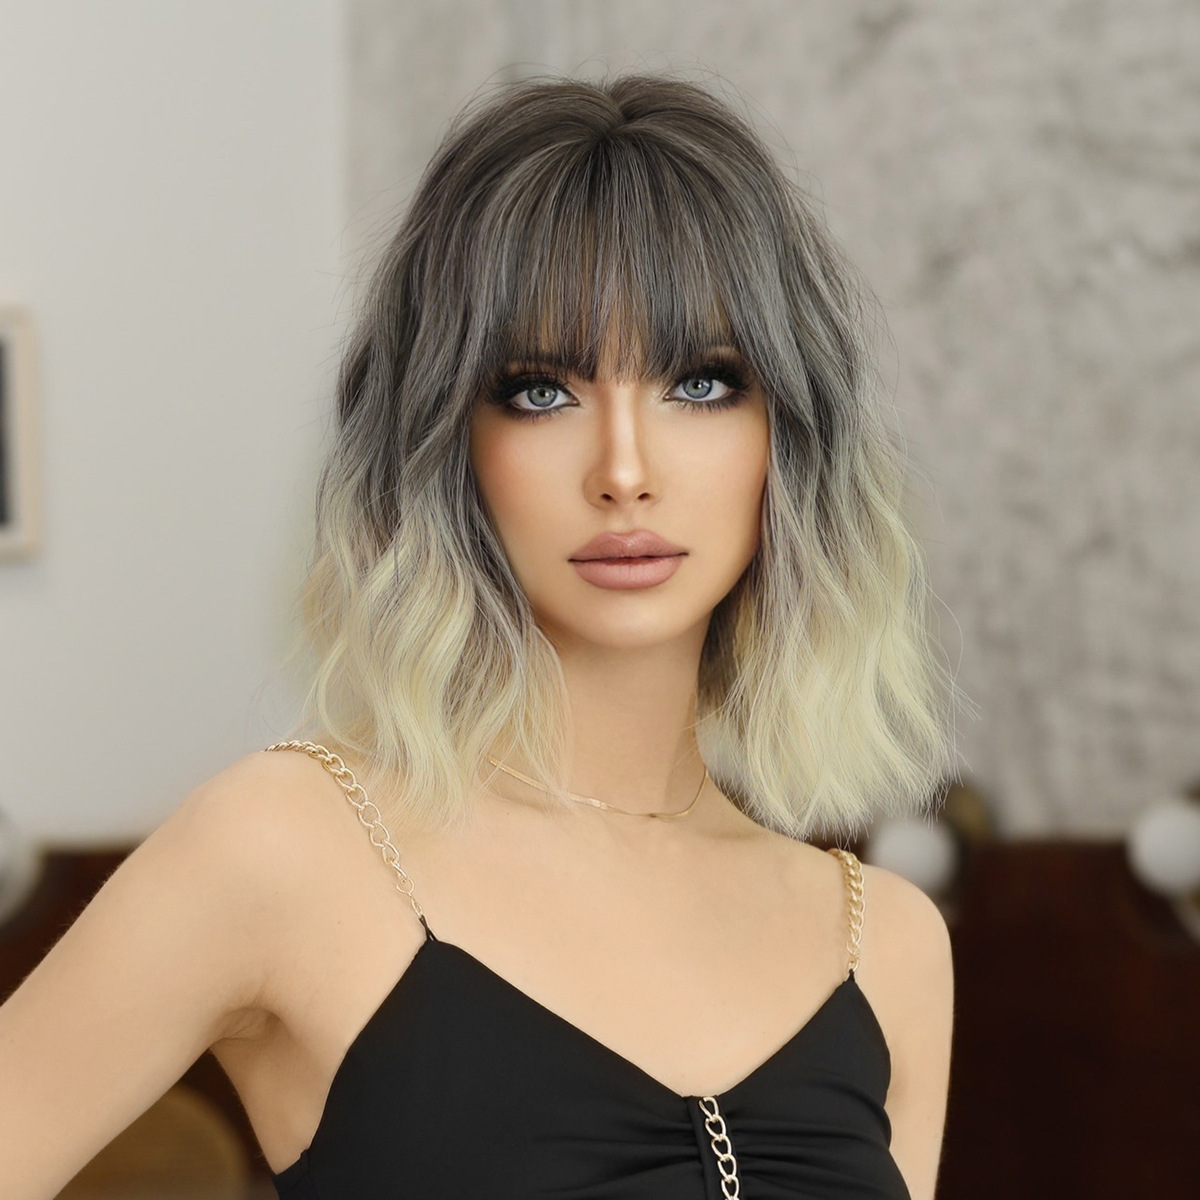 Synthetic wig by Yinraohai, showcasing women's short wavy hair in silver-white color, with dyed Japanese and Korean bangs, gradient effect, ready to go